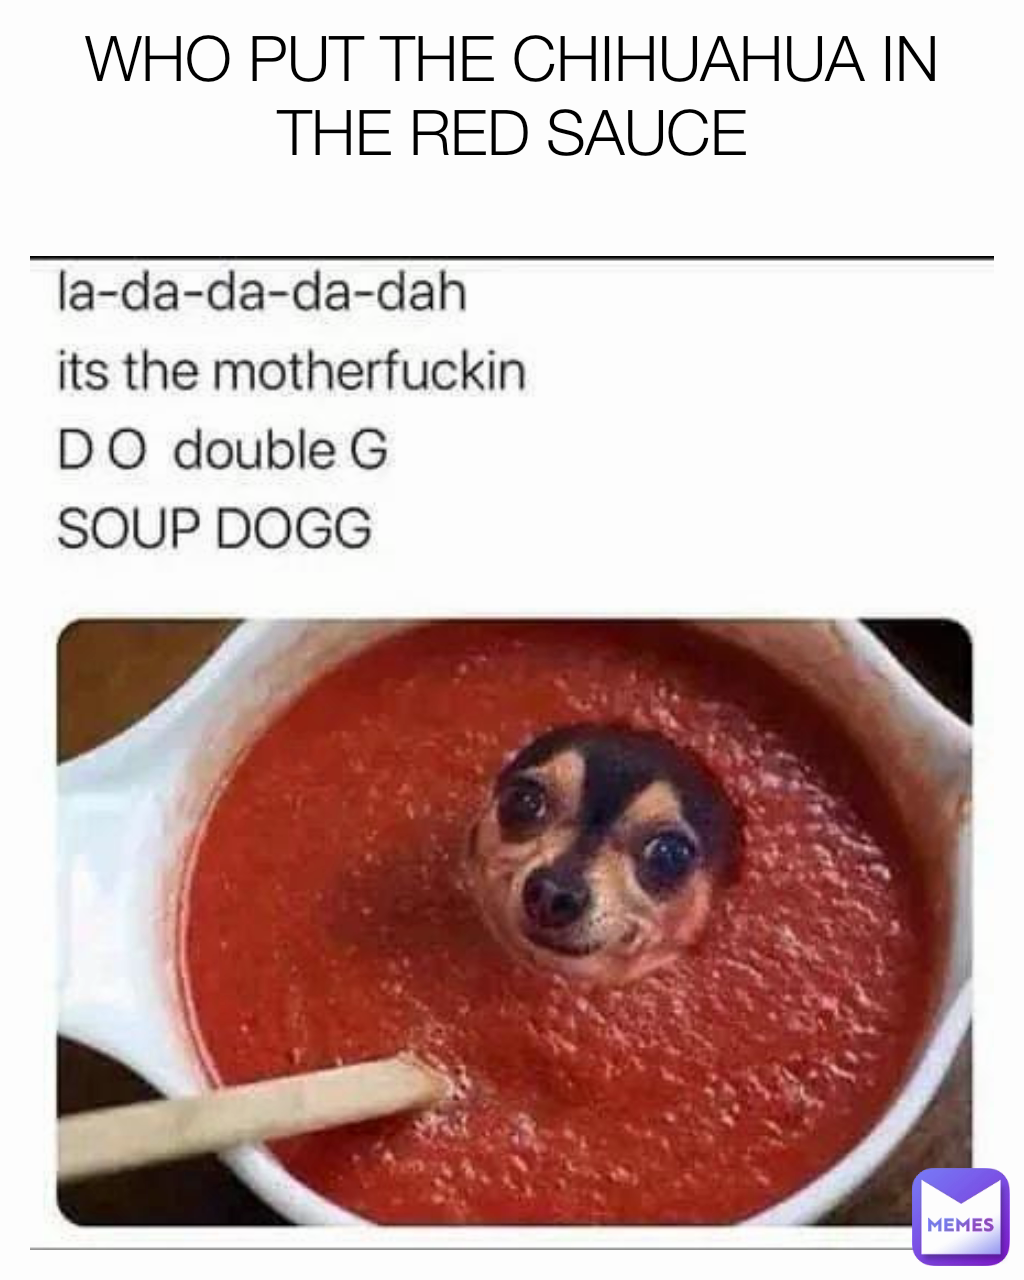 WHO PUT THE CHIHUAHUA IN THE RED SAUCE
